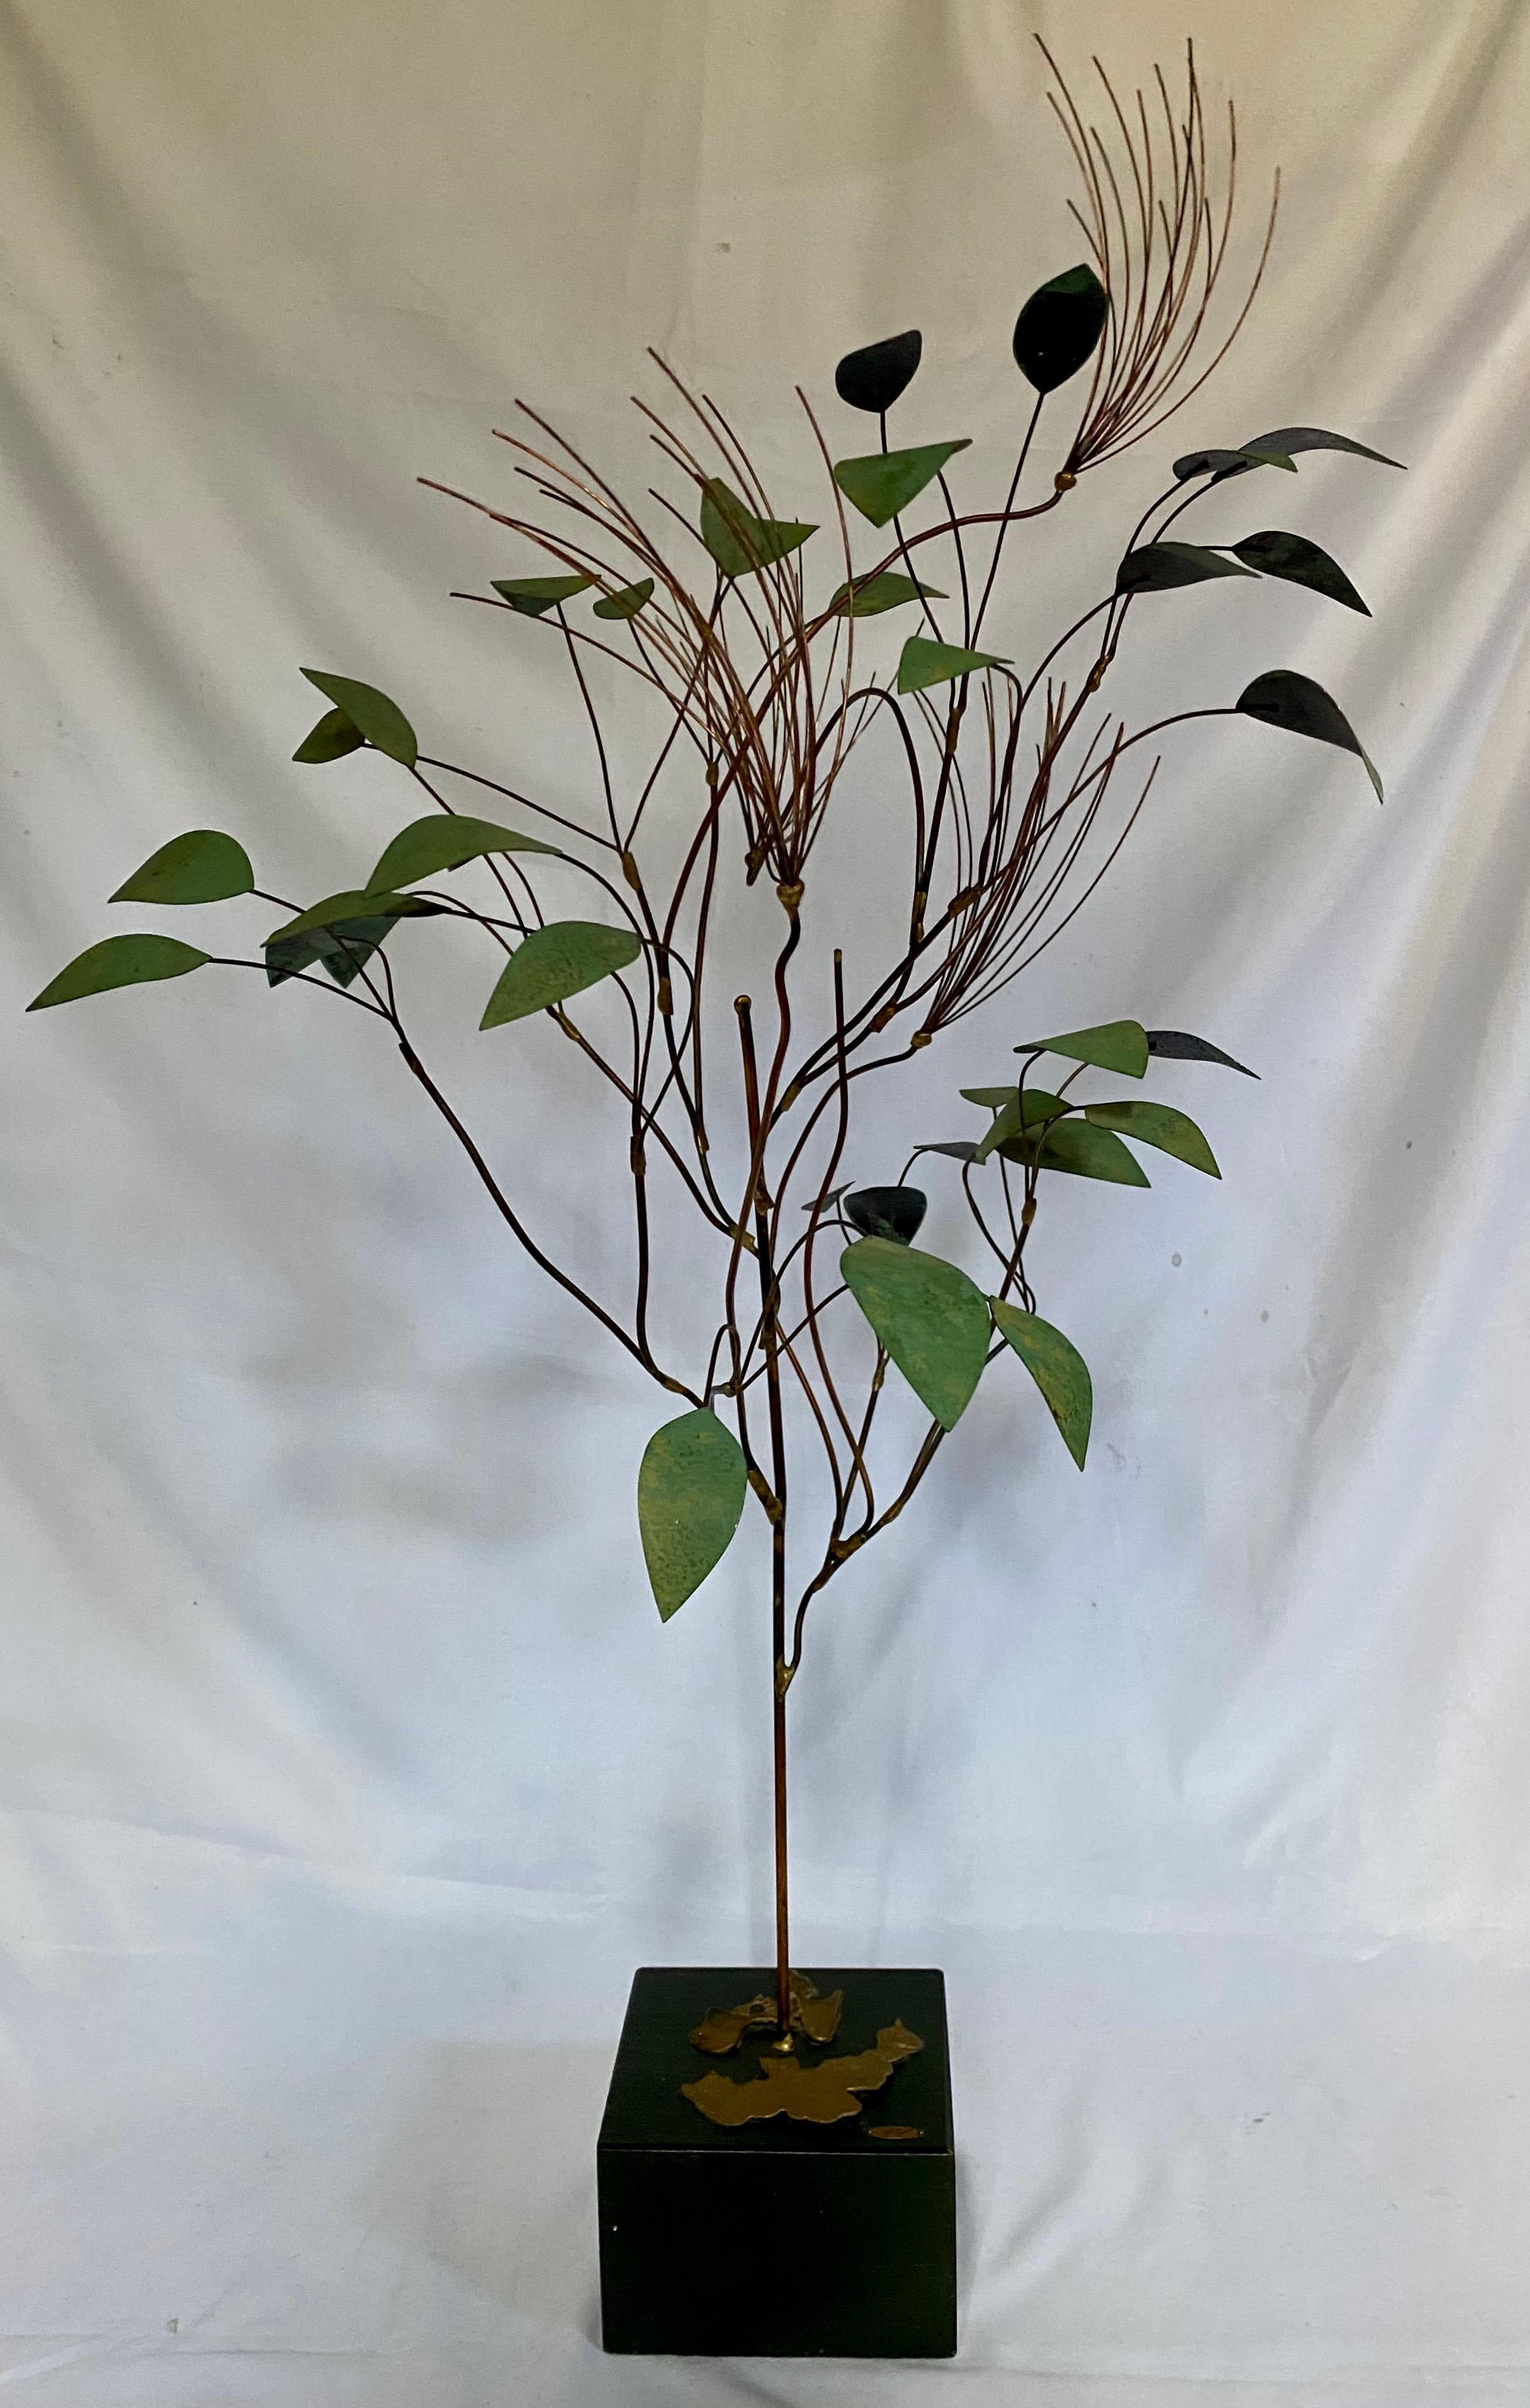 Mid-Century Modern metal tree sculpture by Curtis Jere. This Brutalist art sculpture features brass painted leaves with wire spray bursts and is mounted on a black wood base. Signed and date 1966.

Base measures 5.25 x 5.5 inches.